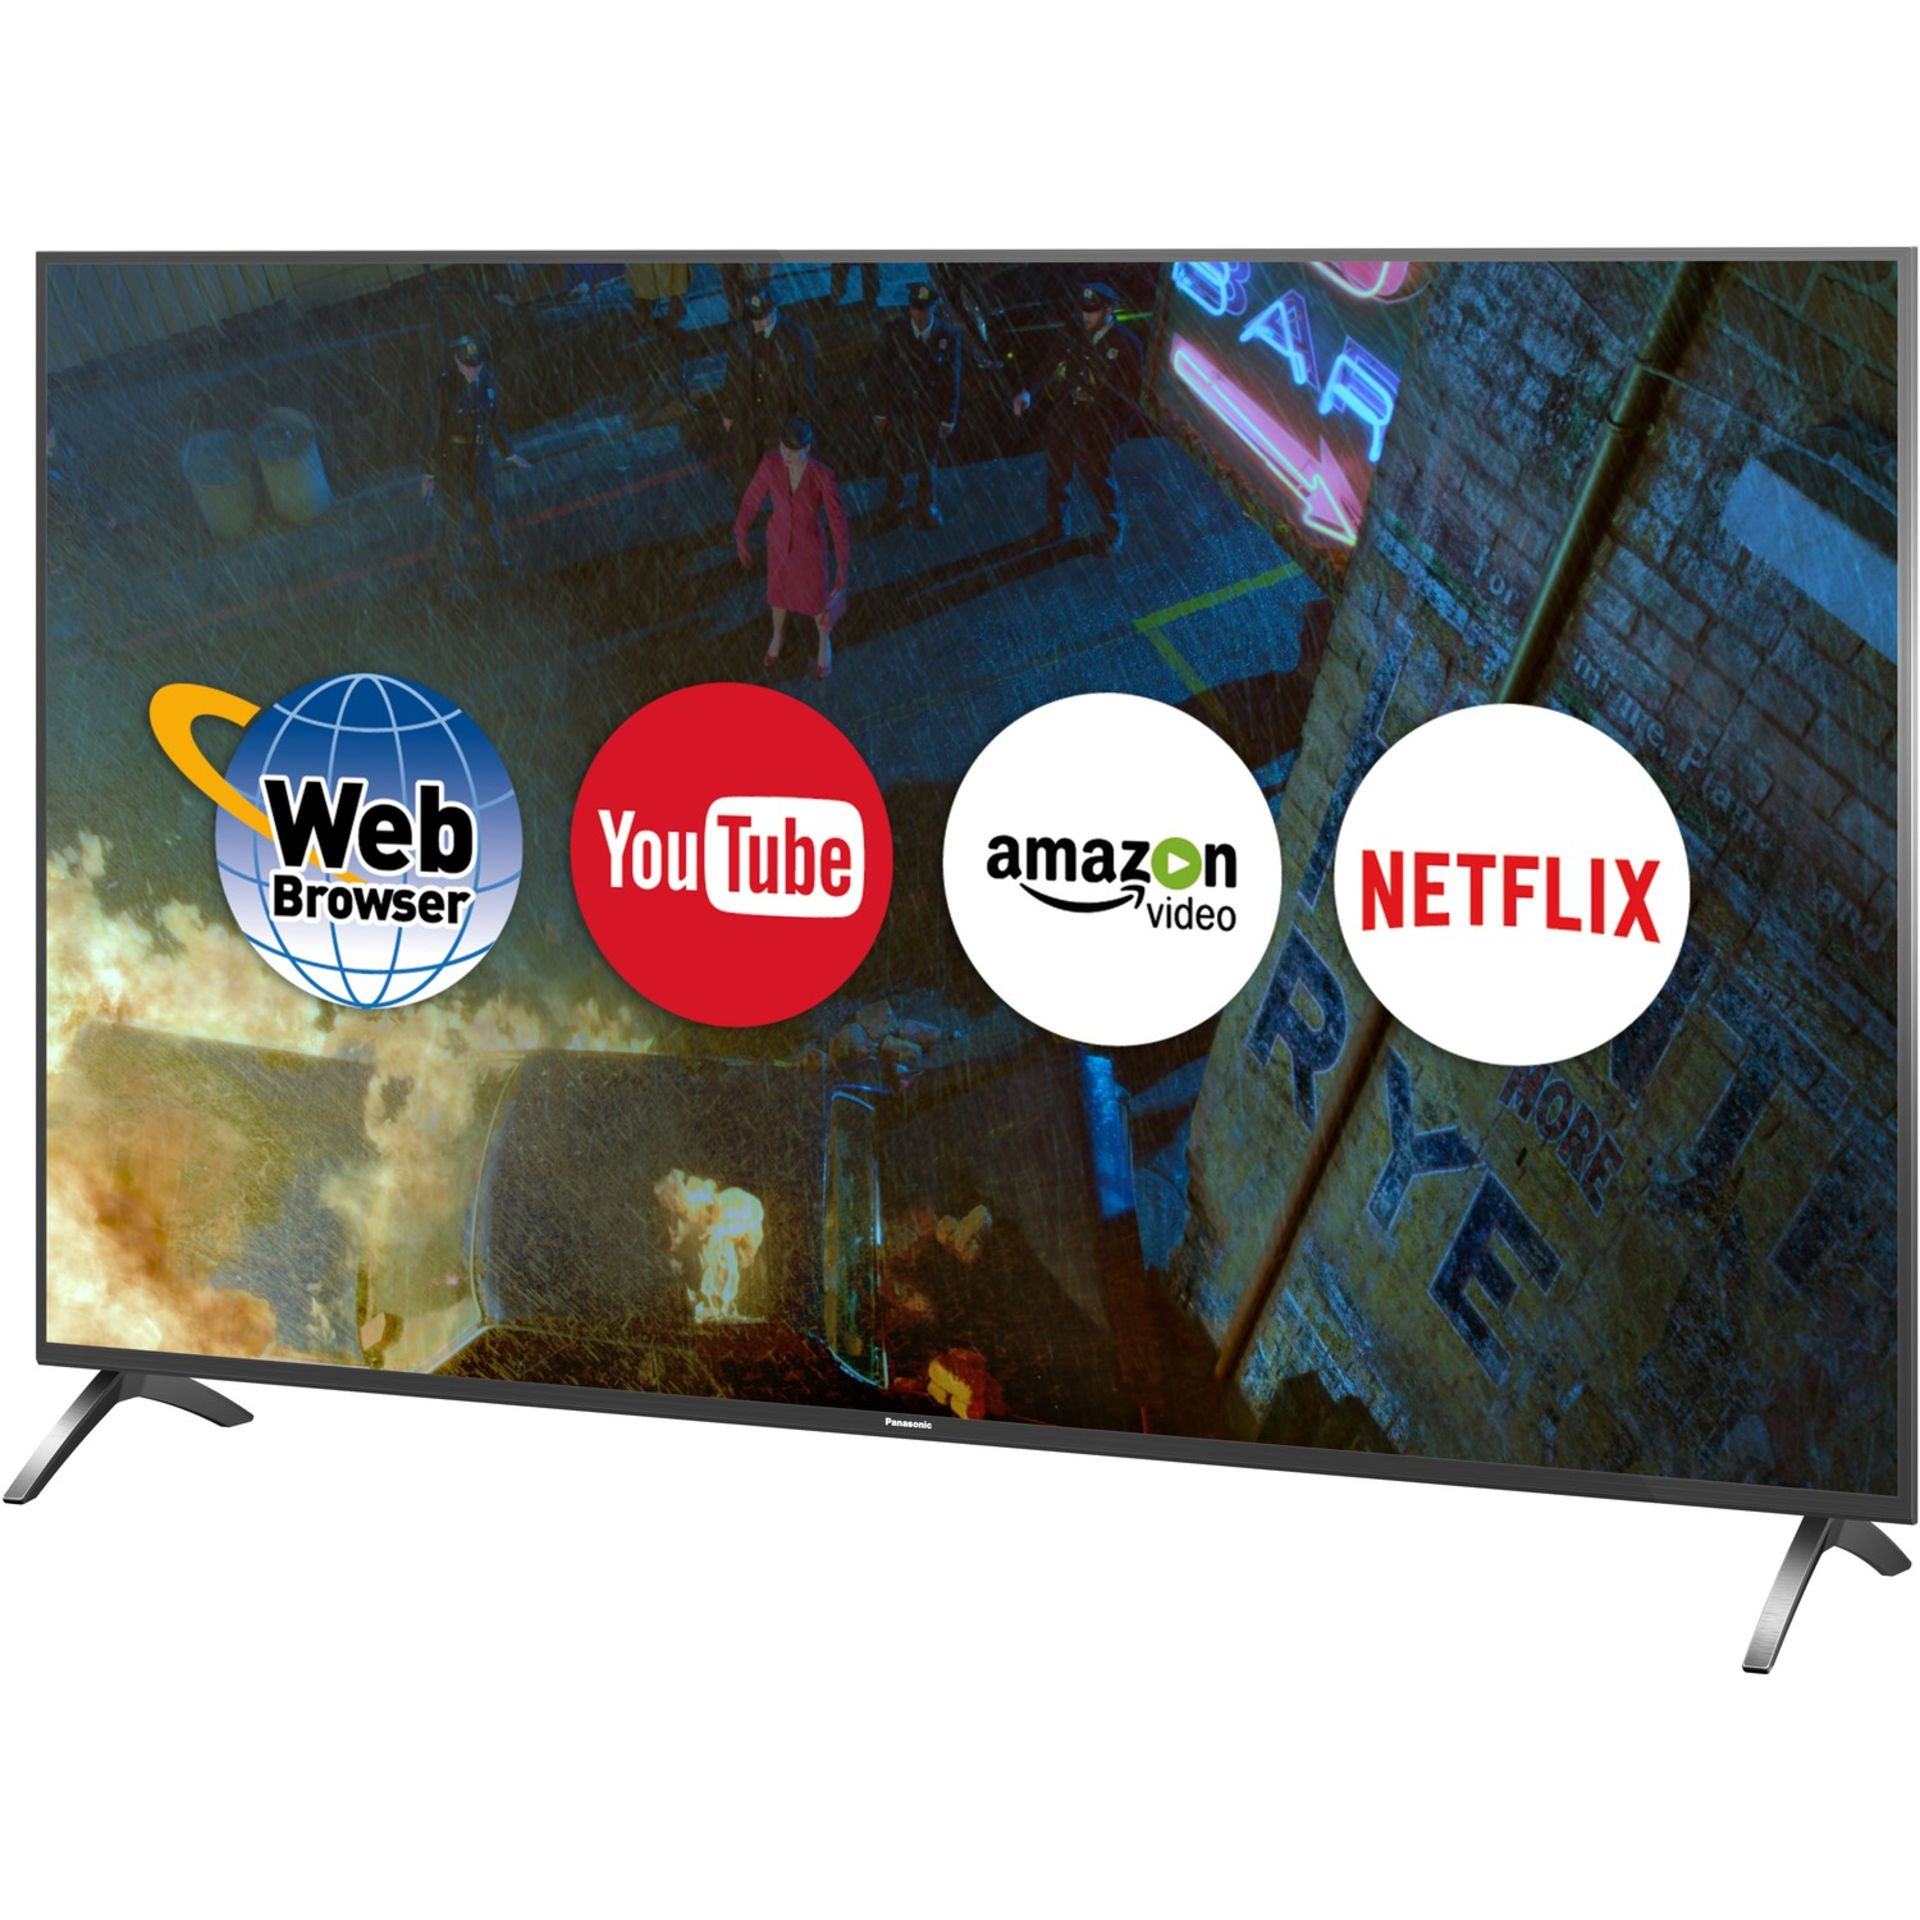 1 BOXED TOSHIBA 55QA4C SERIES 50" 4K ULTRA HD ANDROID SMART TV WITH REMOTE RRP Â£499 (WORKING, 2